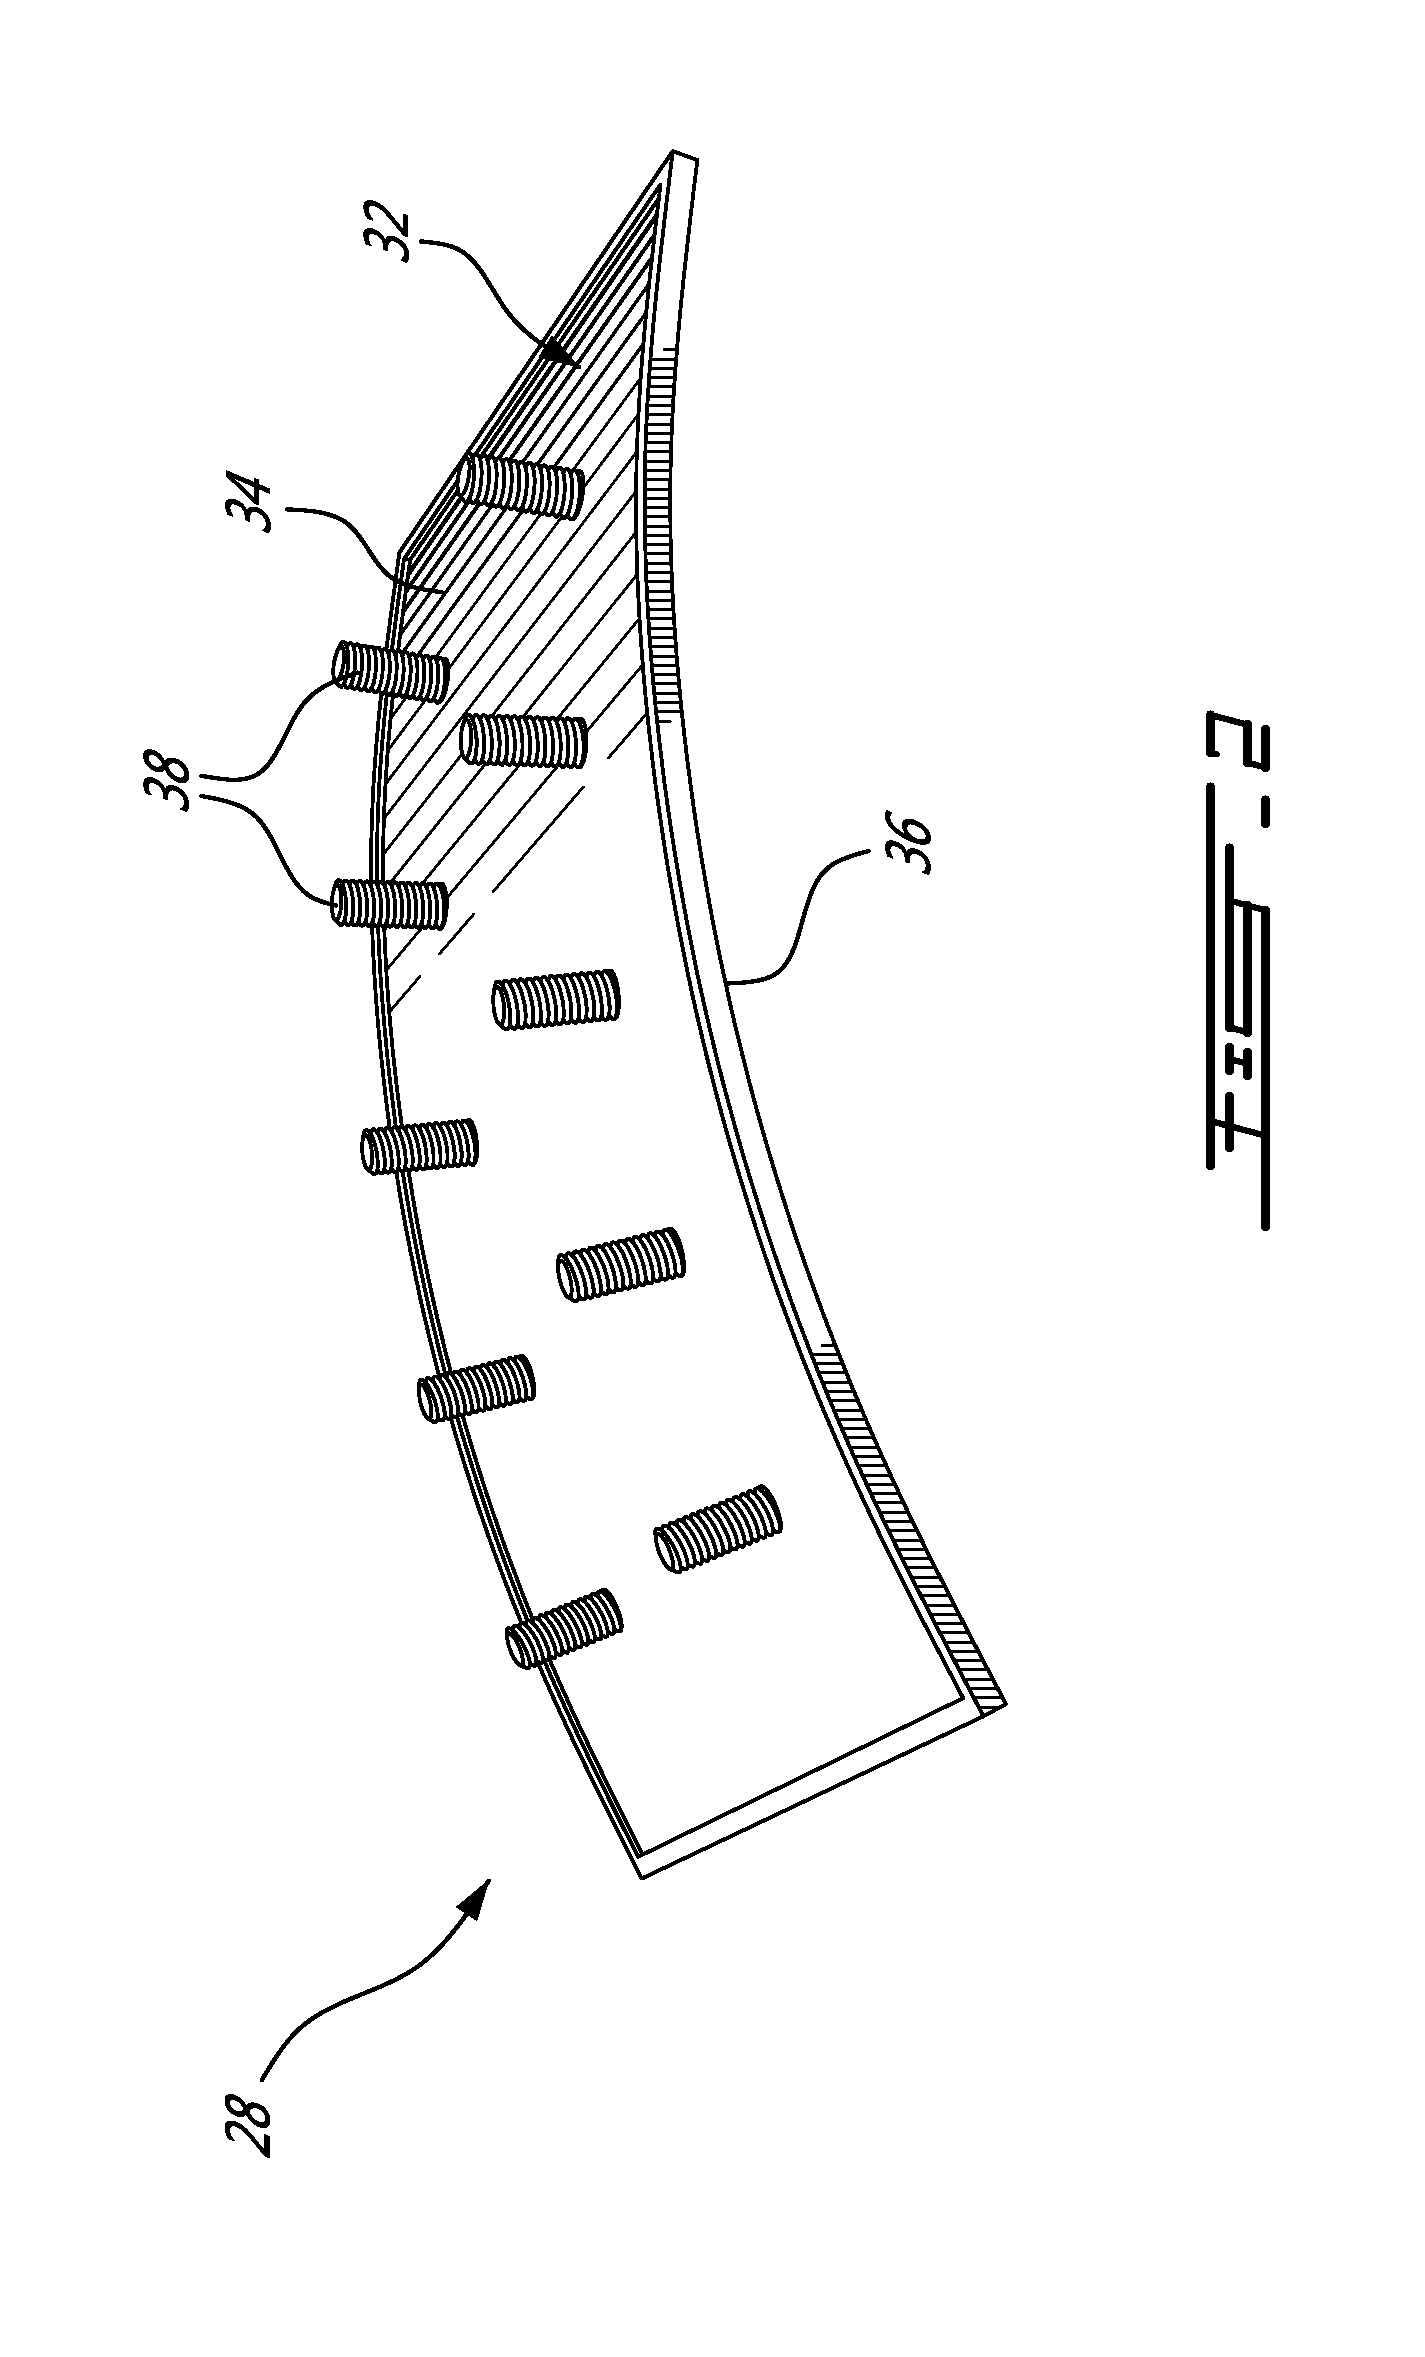 Method of forming a component from a green part